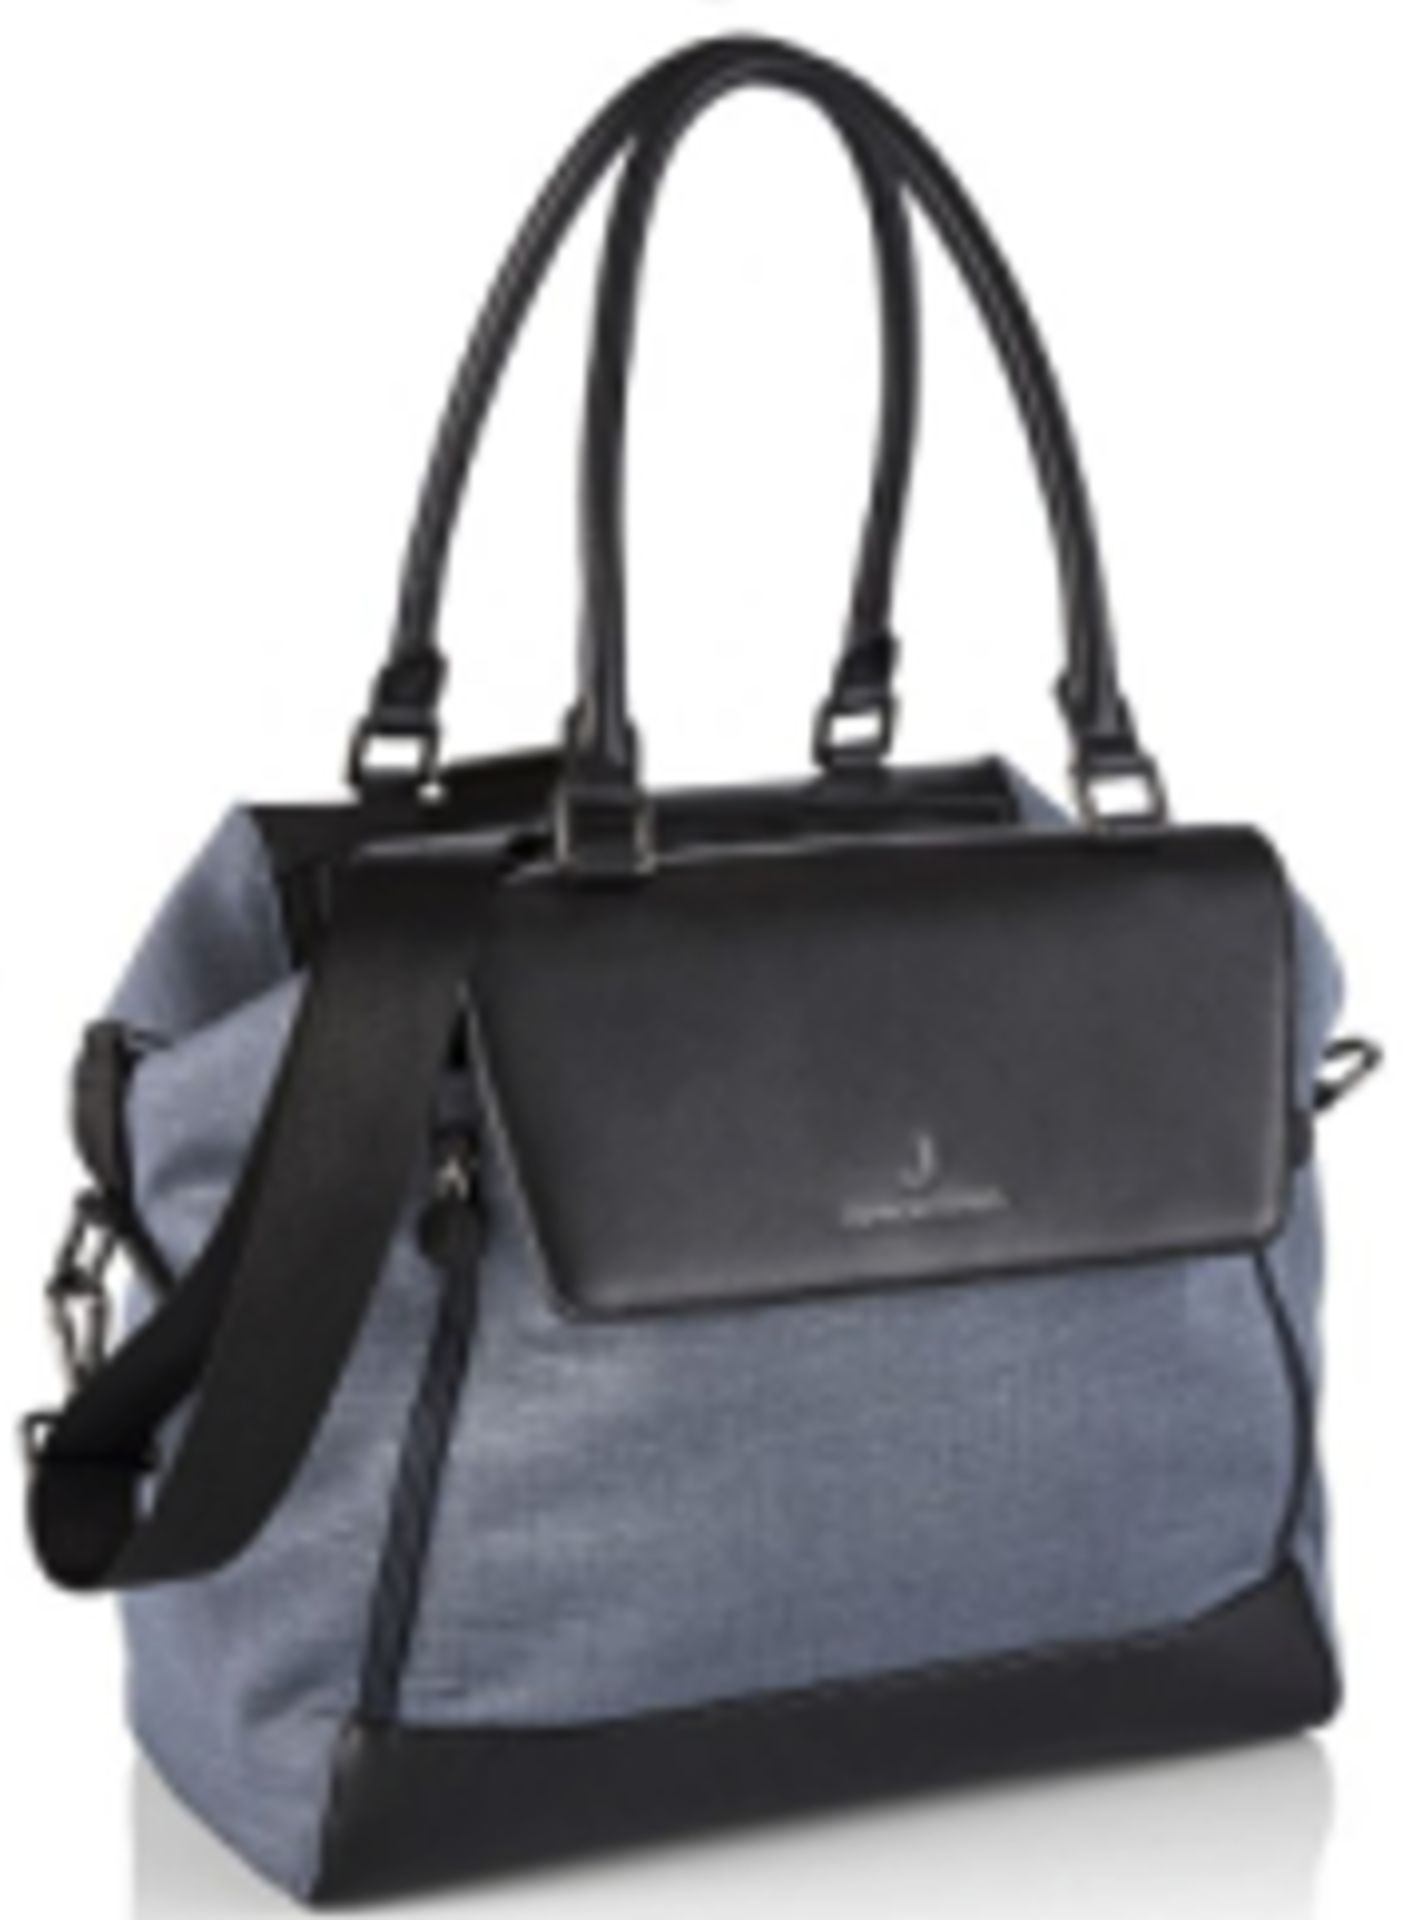 Title: JESSIE CHANGING BAG- FROST GREY RRP £140Description: JESSIE CHANGING BAG- FROST GREY RRP £